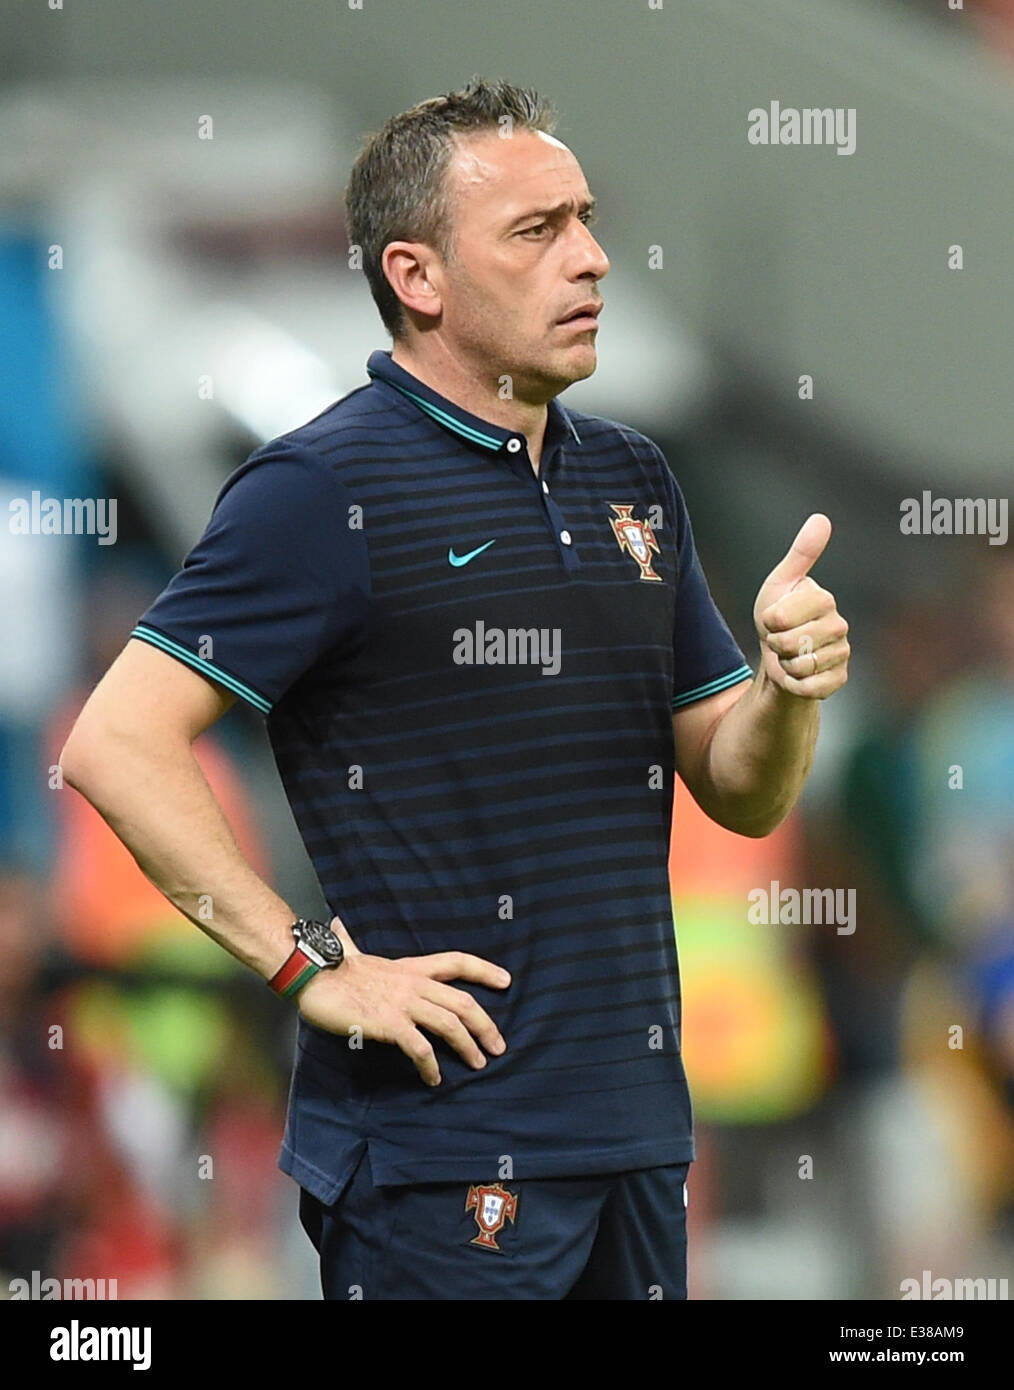 Manaus, Brazil. 22nd June, 2014. Head coach Paulo Bento of Portugal thumbs up during the FIFA World Cup 2014 group G preliminary round match between the USA and Portugal at the Arena Amazonia Stadium in Manaus, Brazil, 22 June 2014. Photo: Marius Becker/dpa/Alamy Live News Stock Photo